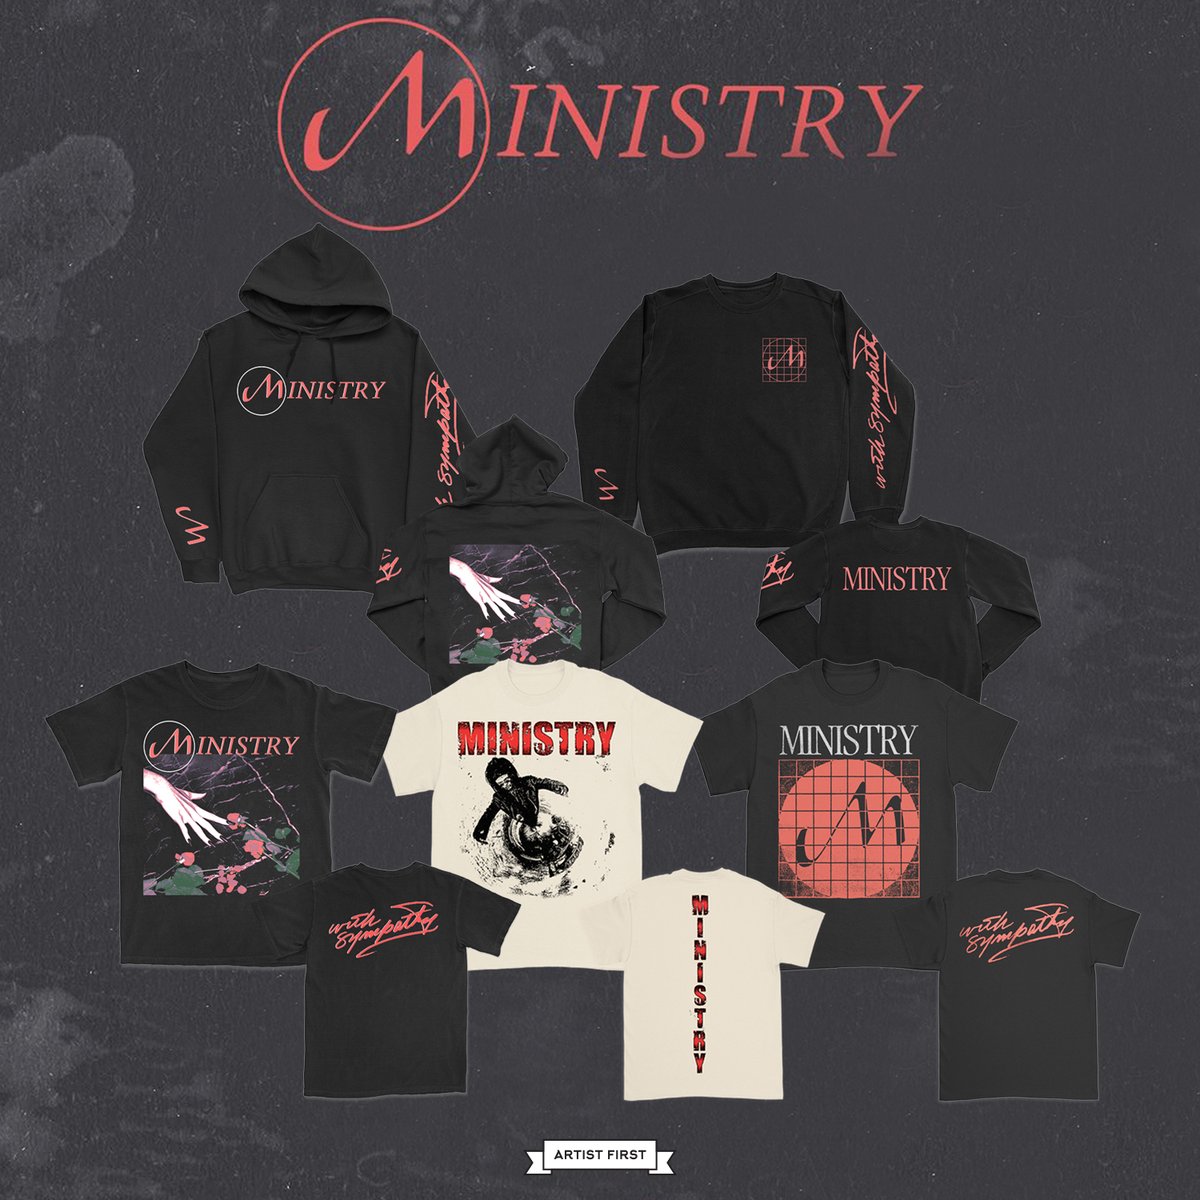 AUSTRALIA!! 🇦🇺🍄Get your MINISTRY merch! New Items in our Australian Store🌹👽🎃🍄 artistfirst.com.au/collections/mi…